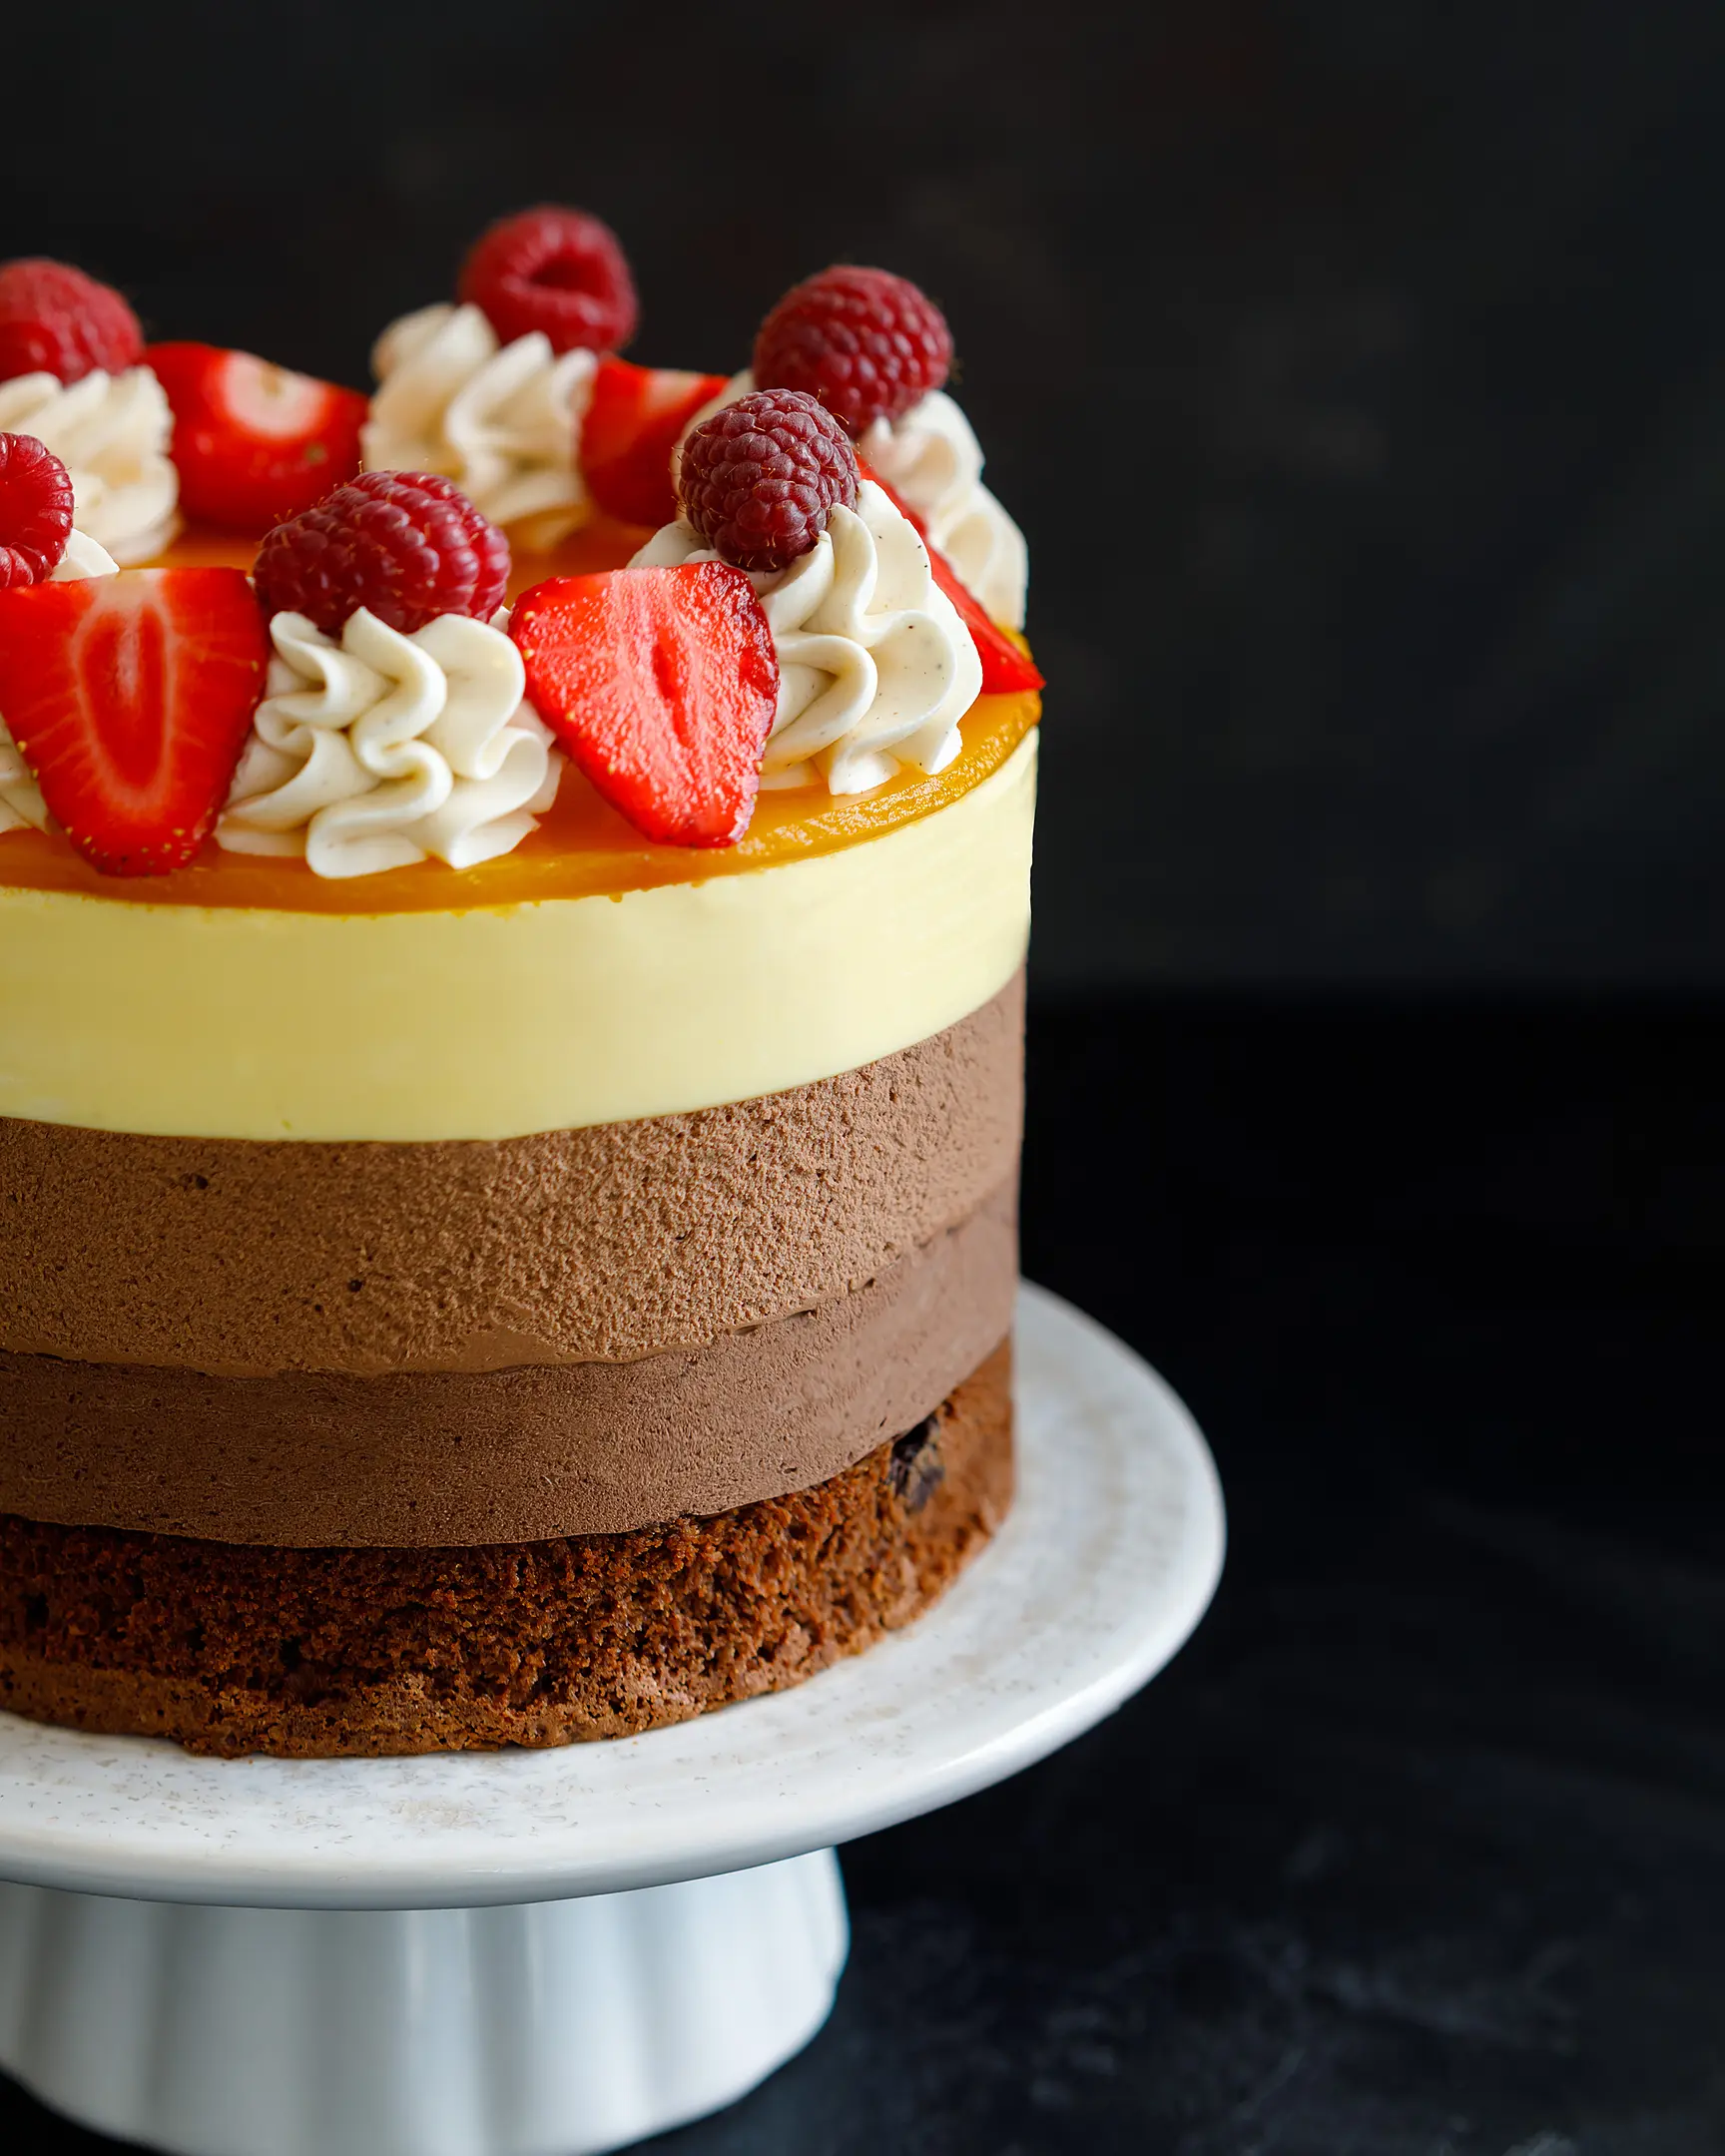 The photo shows a three-chocolate cake. The photo shows a three-chocolate cake. All three layers of different colors are visible. The cake is decorated with raspberries and strawberries.